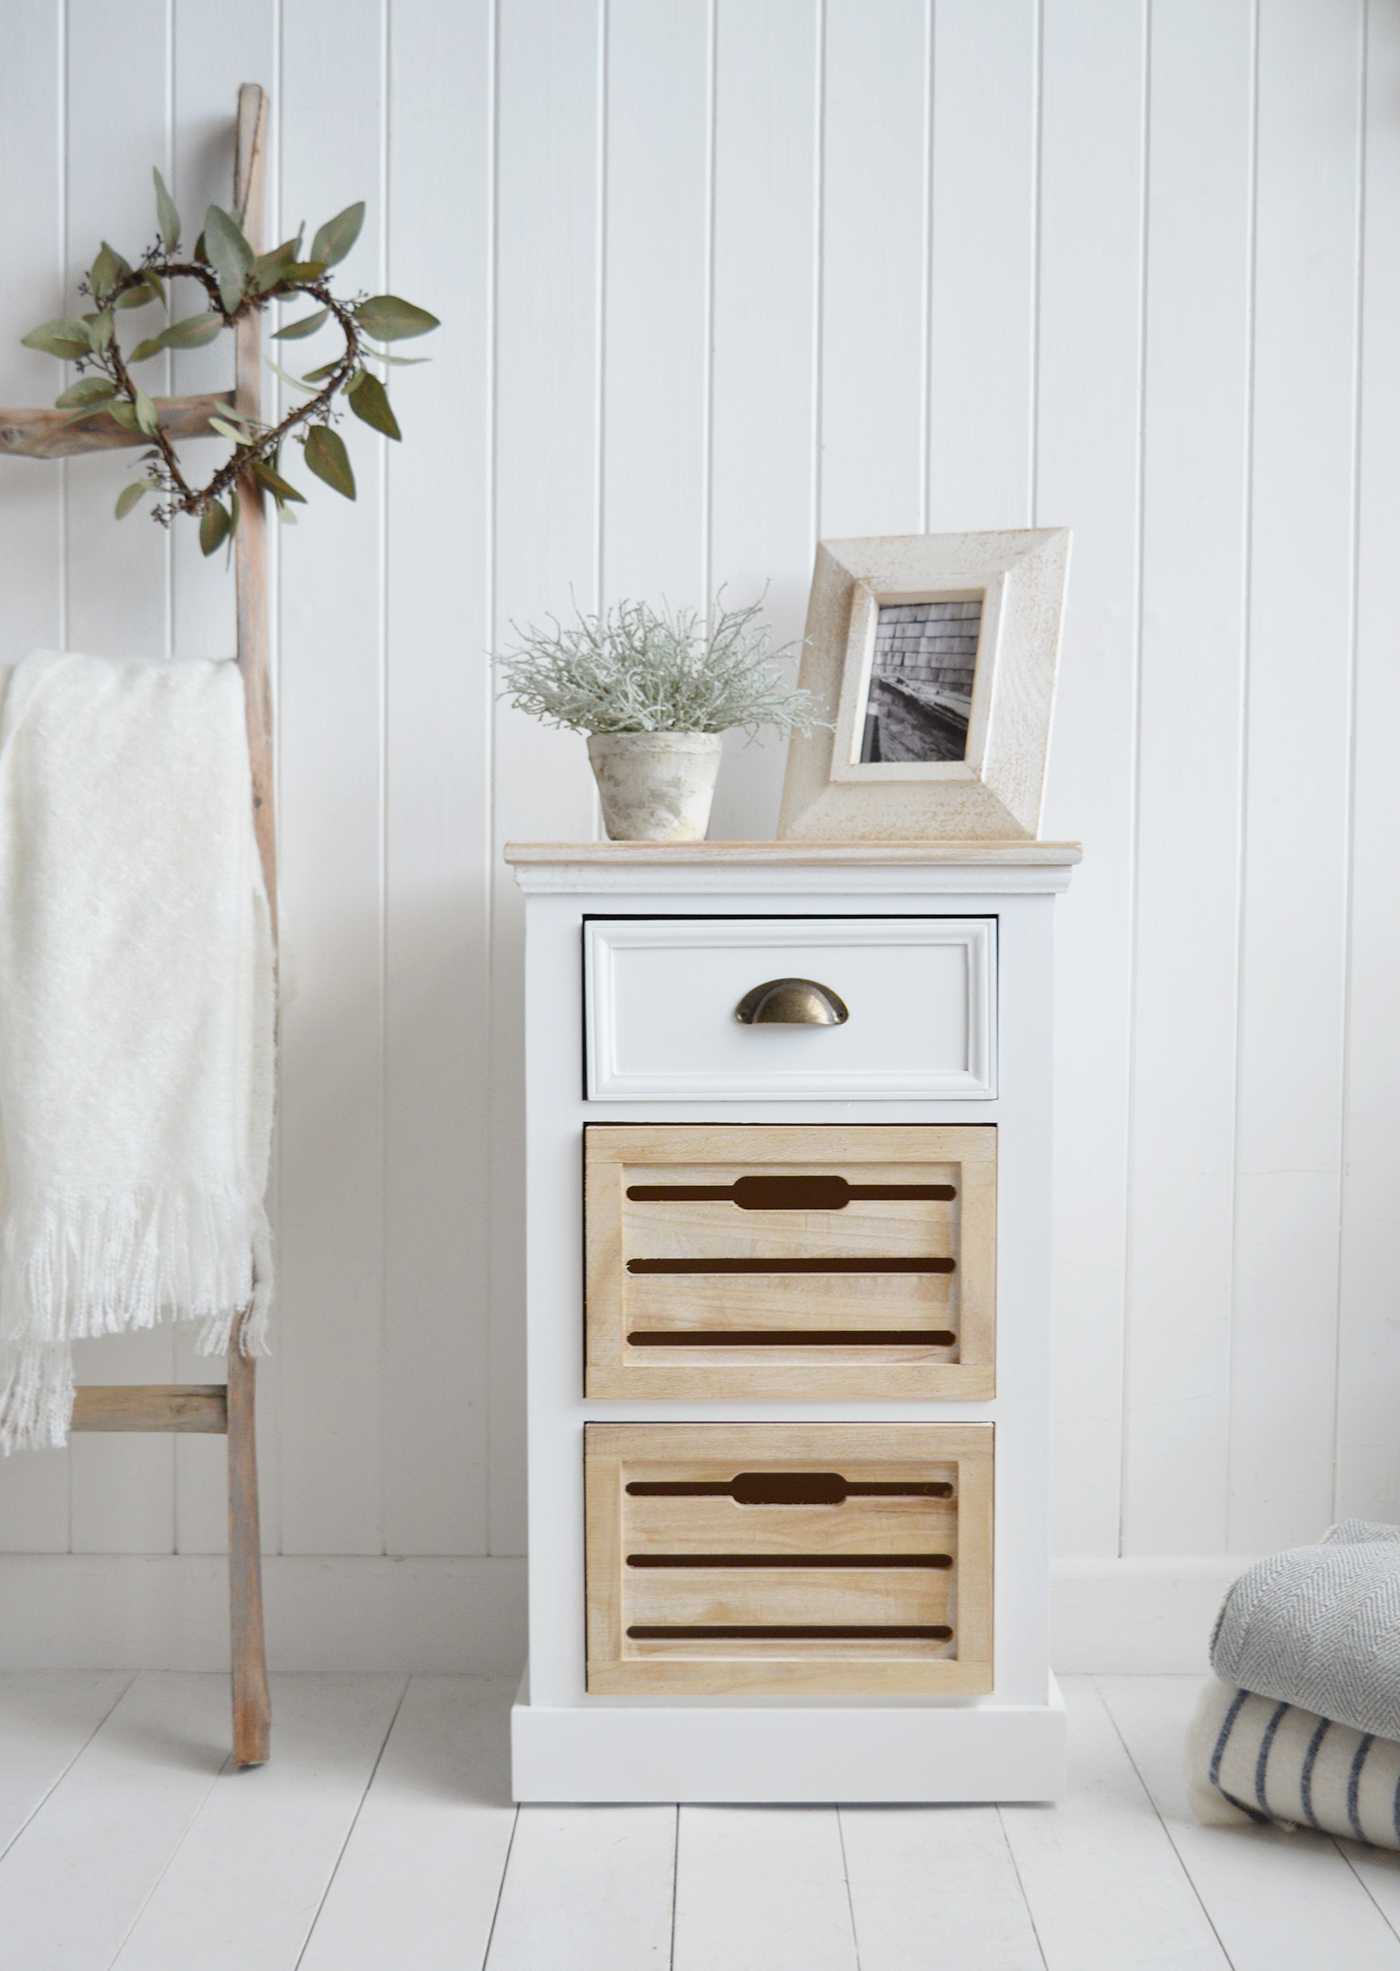 Southport White Cabinet - Bedside Lamp Table. Modern Country, Farmhouse and Coastal Furniture